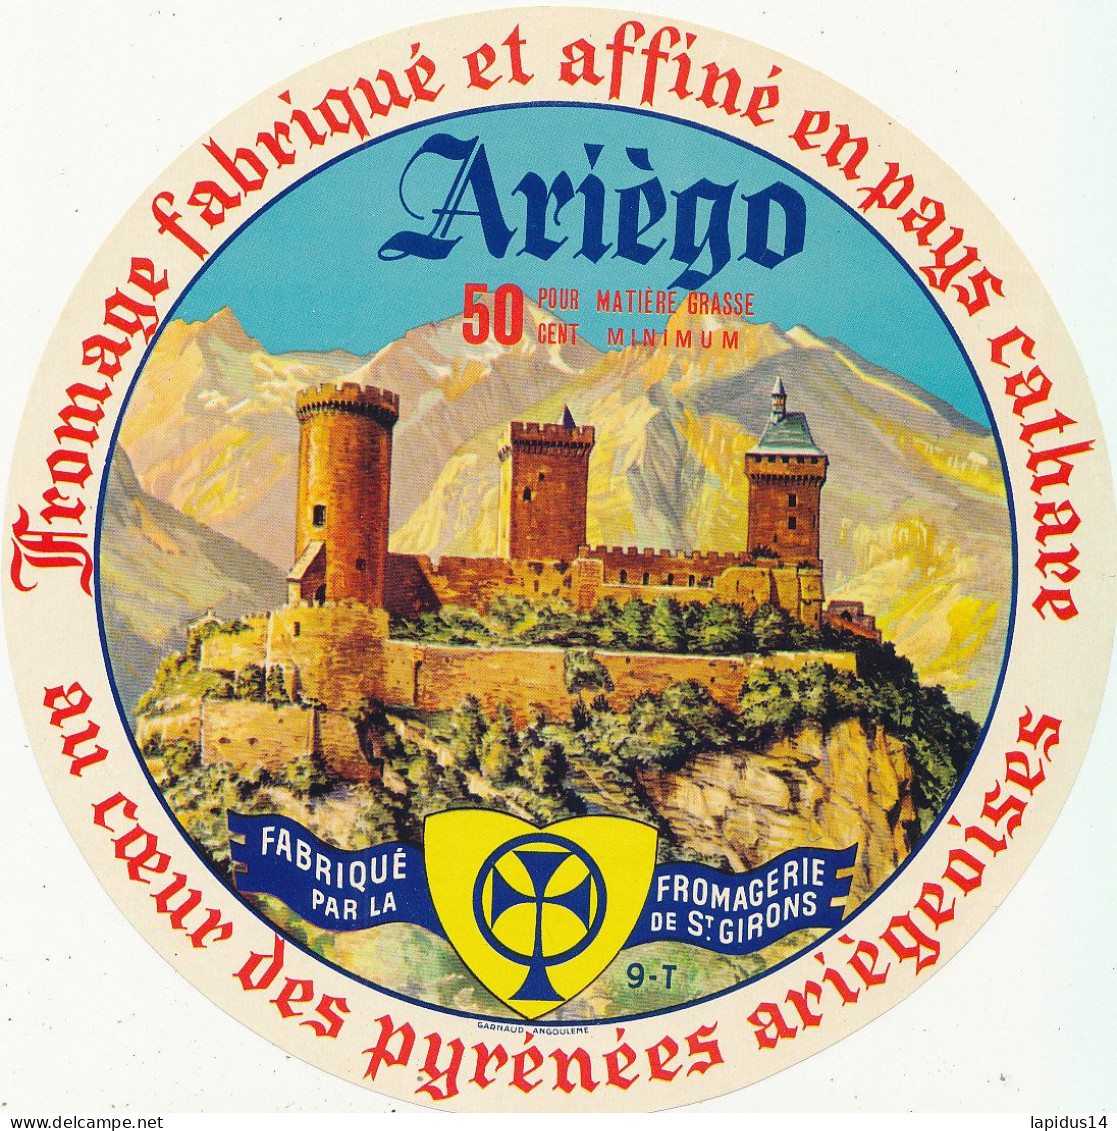 G F 1589 /  ETIQUETTE DE FROMAGE  ARIEGO   FROMAGERIE DE ST GIRONS  ARIEGE - Cheese